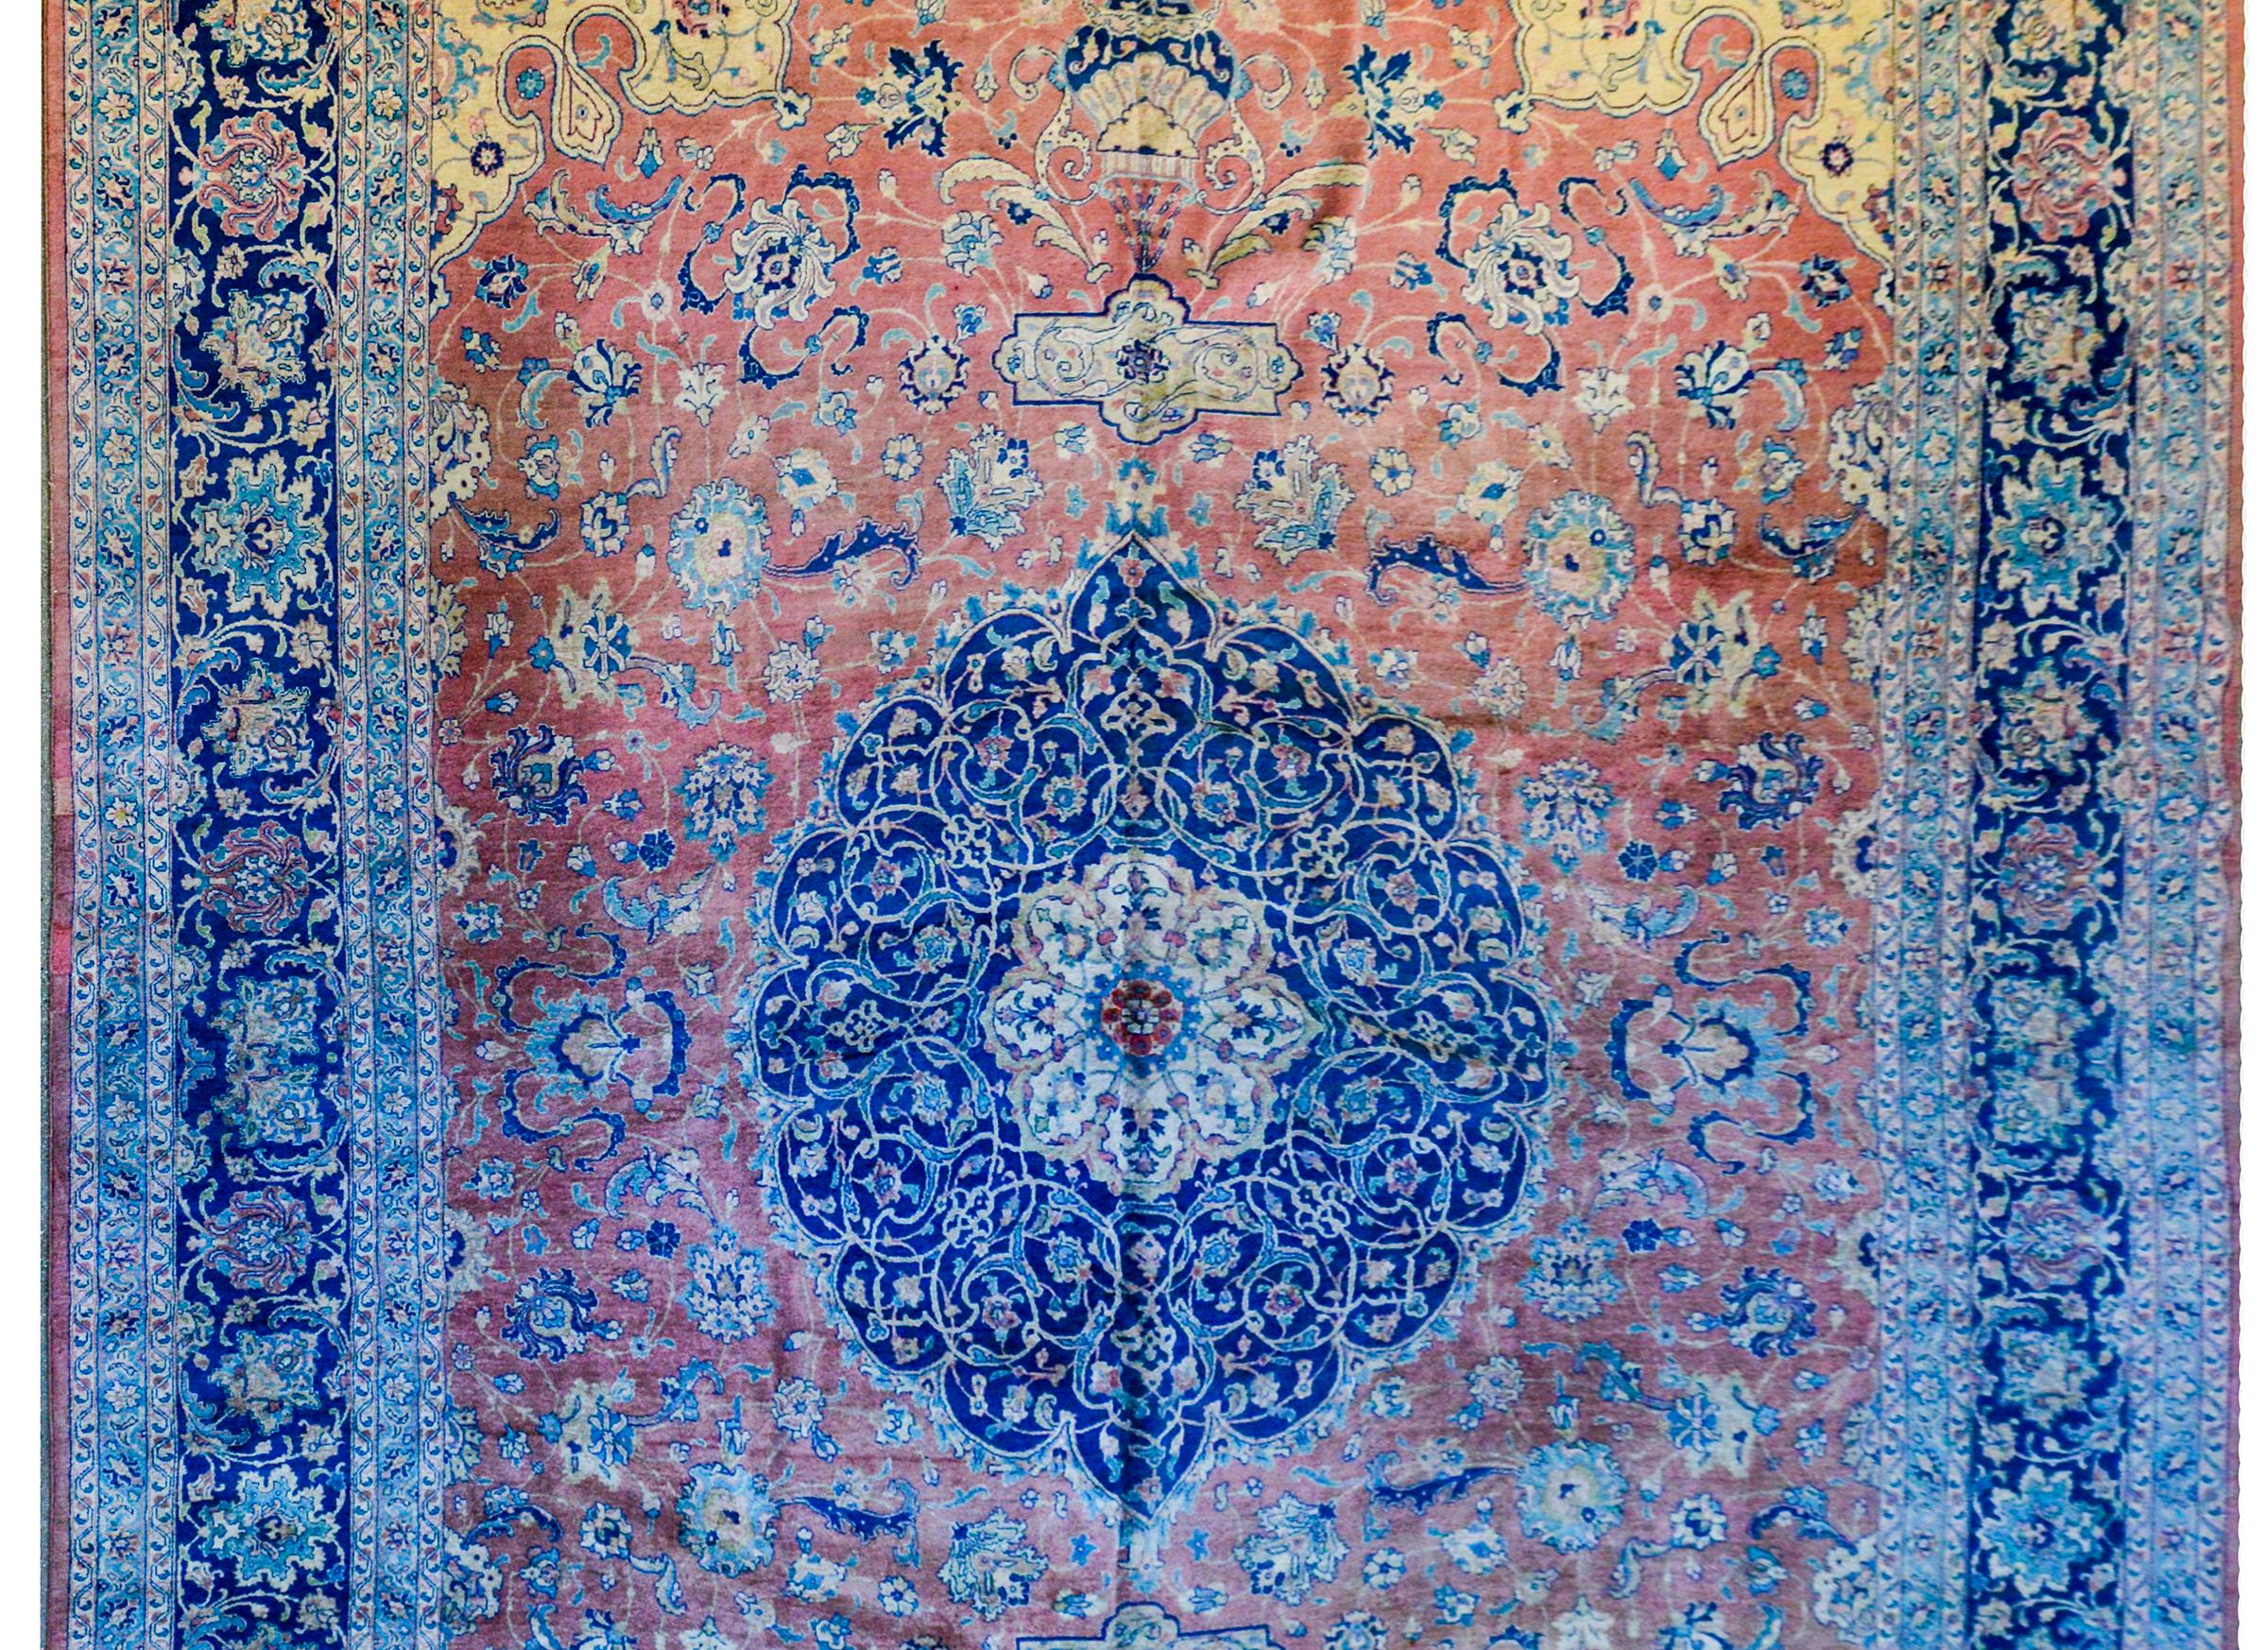 A beautiful early 20th century Persian Tabriz rug with a fantastic large central floral medallion woven in indigo, pink, and gold, on a wonderful salmon colored ground with myriad flowers and scrolling vines. The border is wide with one wide central